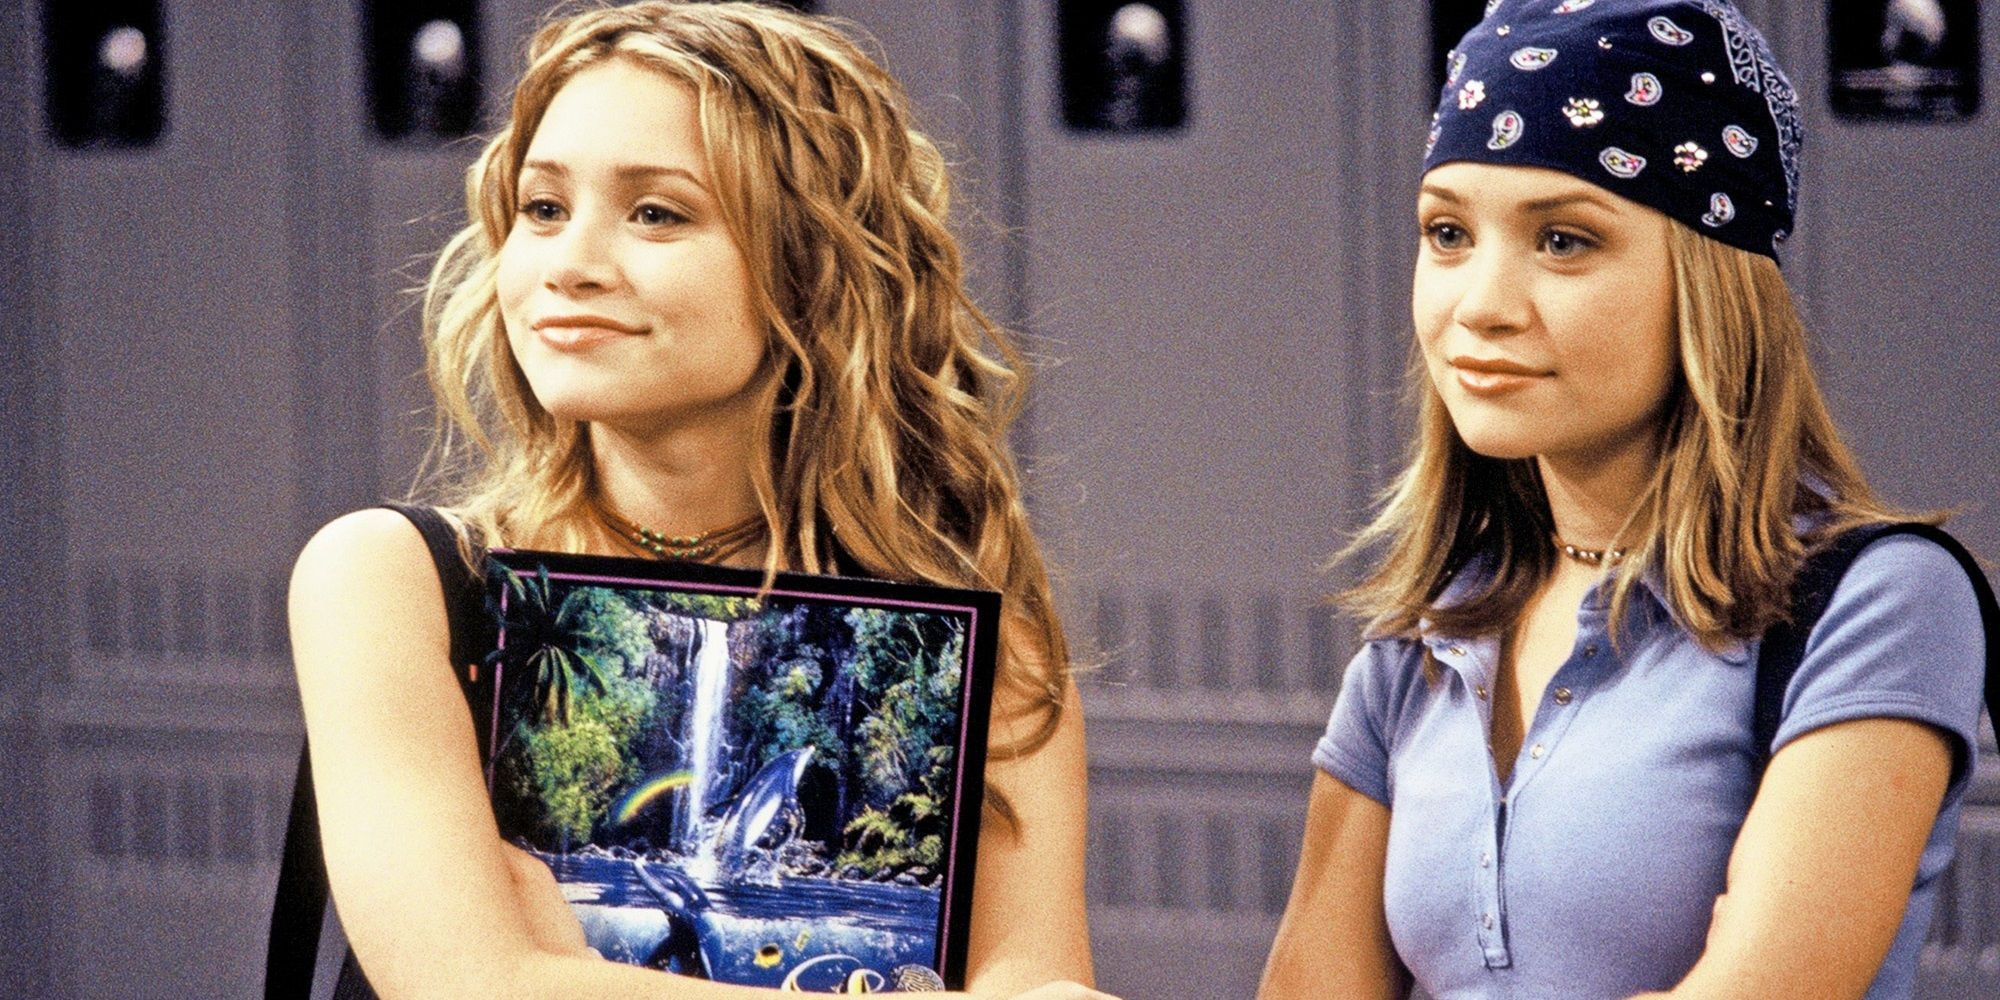 Mary-Kate Ashley Olsen on their final sitcom, So Little Time, at their lockers